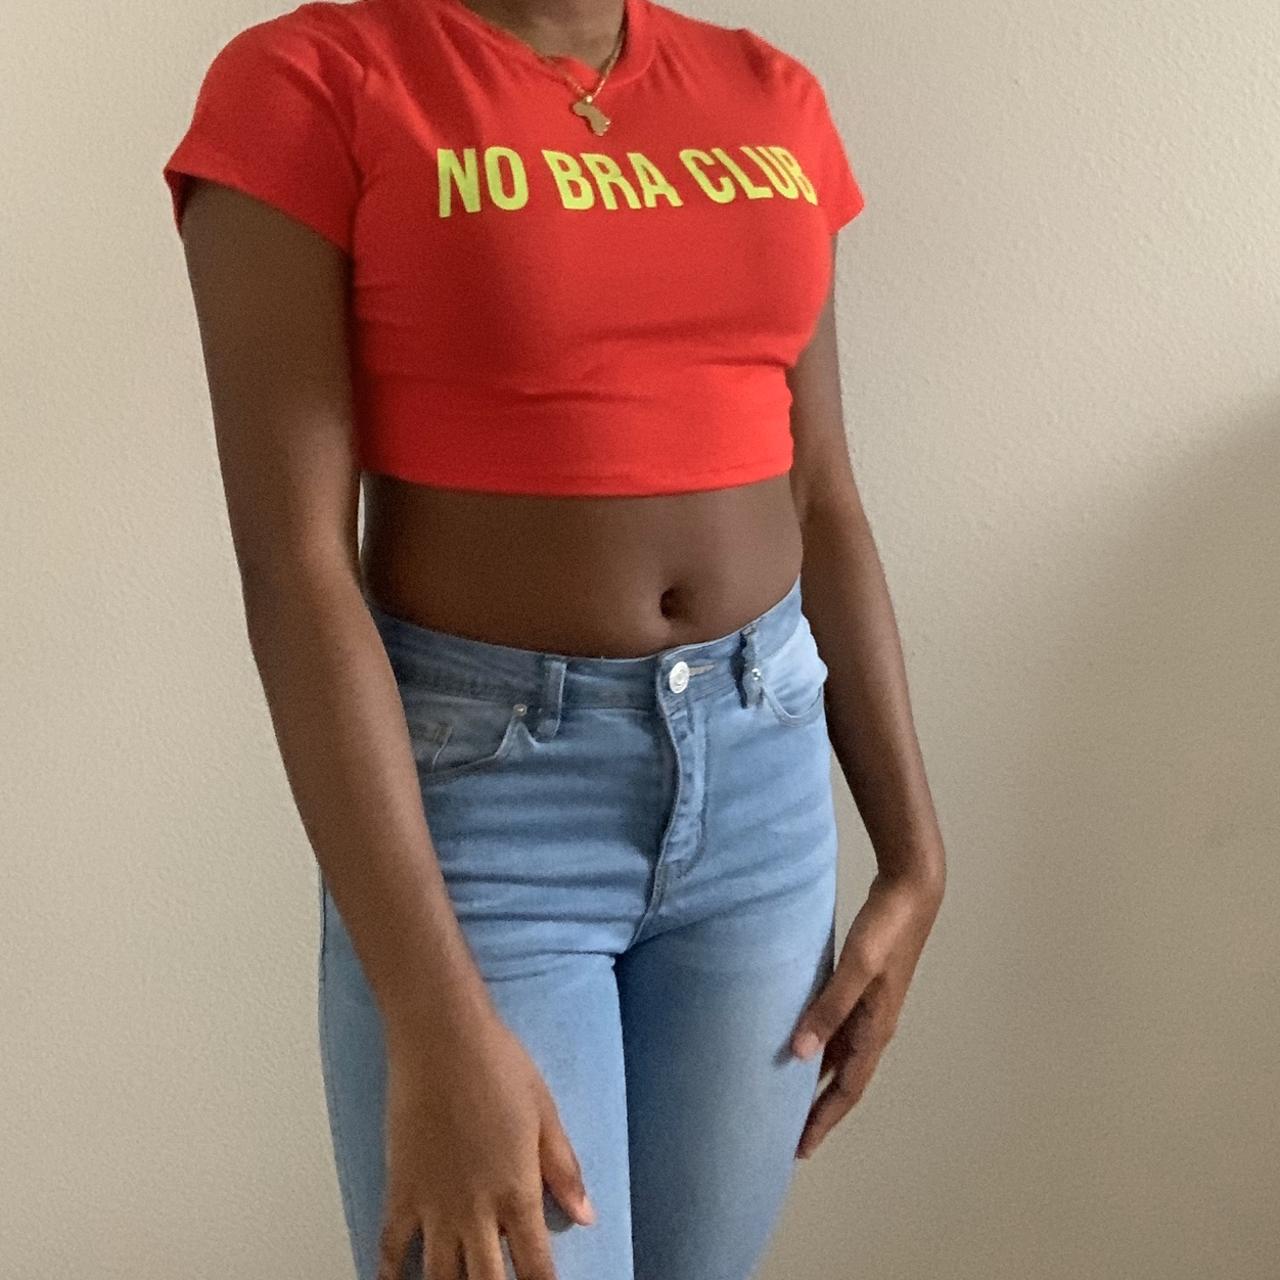 Red No bra club fitted crop top. Cute for a casual - Depop